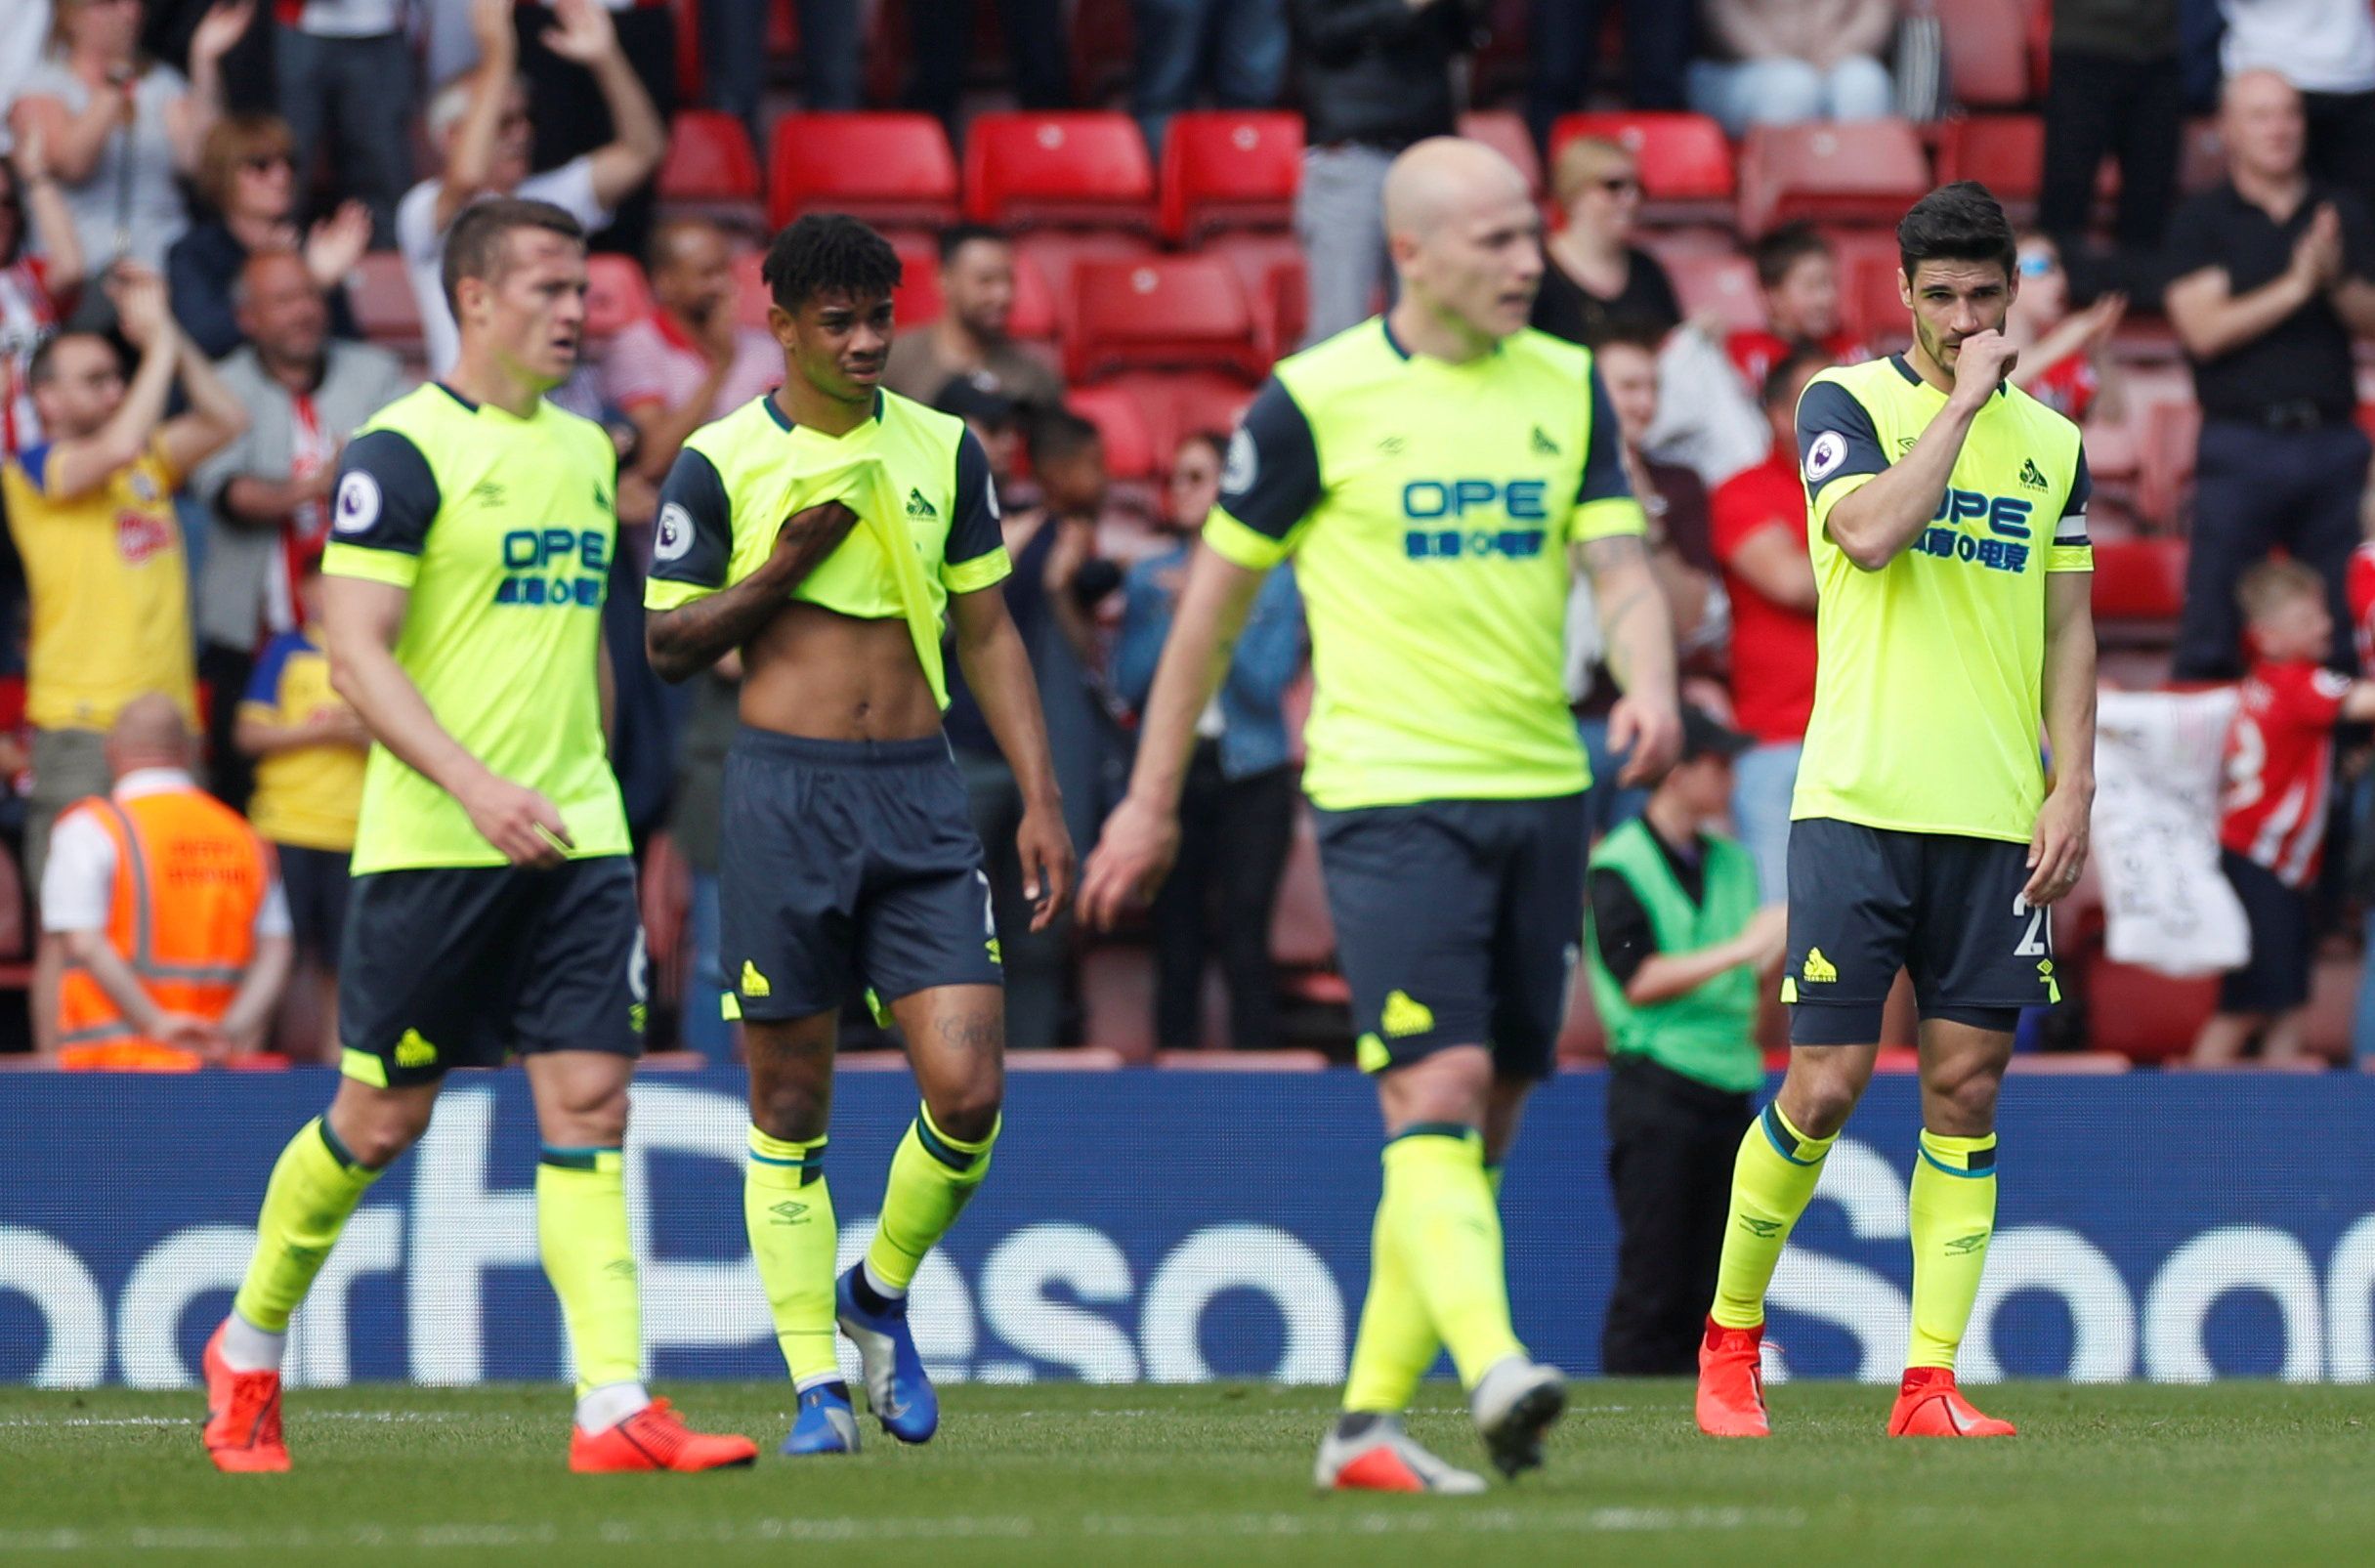 Soccer Football - Premier League - Southampton v Huddersfield Town - St Mary's Stadium, Southampton, Britain - May 12, 2019  Huddersfield Town's Christopher Schindler and team mates look dejected after Southampton's Nathan Redmond scores their first goal       Action Images via Reuters/Paul Childs  EDITORIAL USE ONLY. No use with unauthorized audio, video, data, fixture lists, club/league logos or 